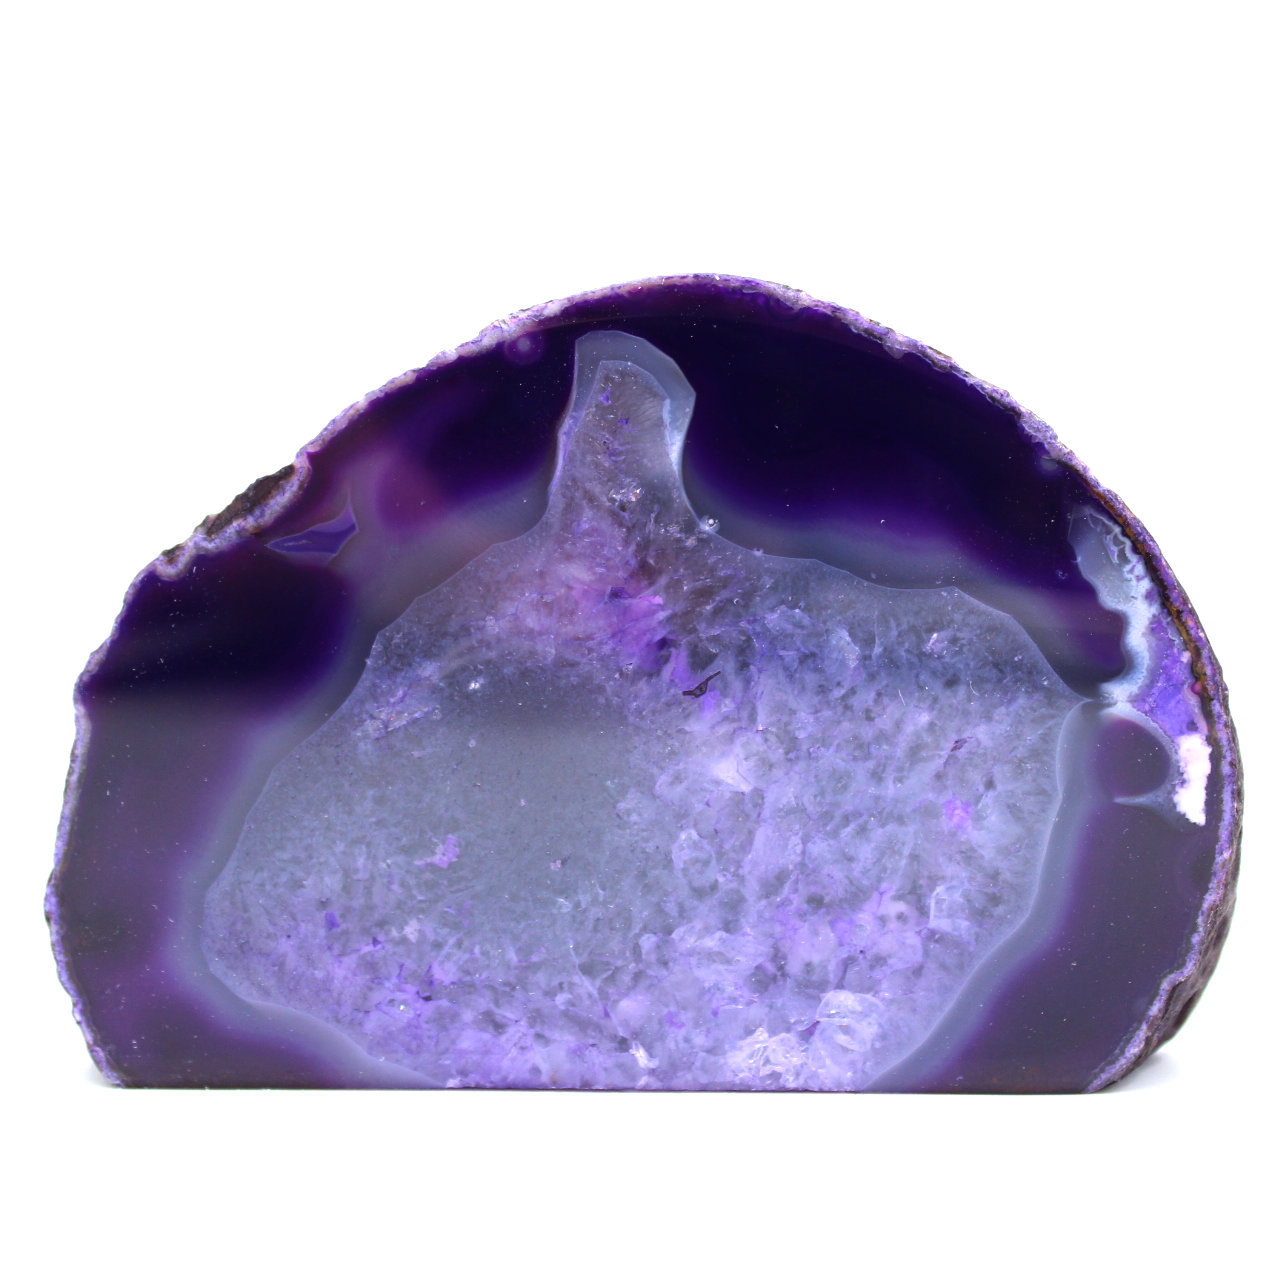 Violet agate stone from Brazil